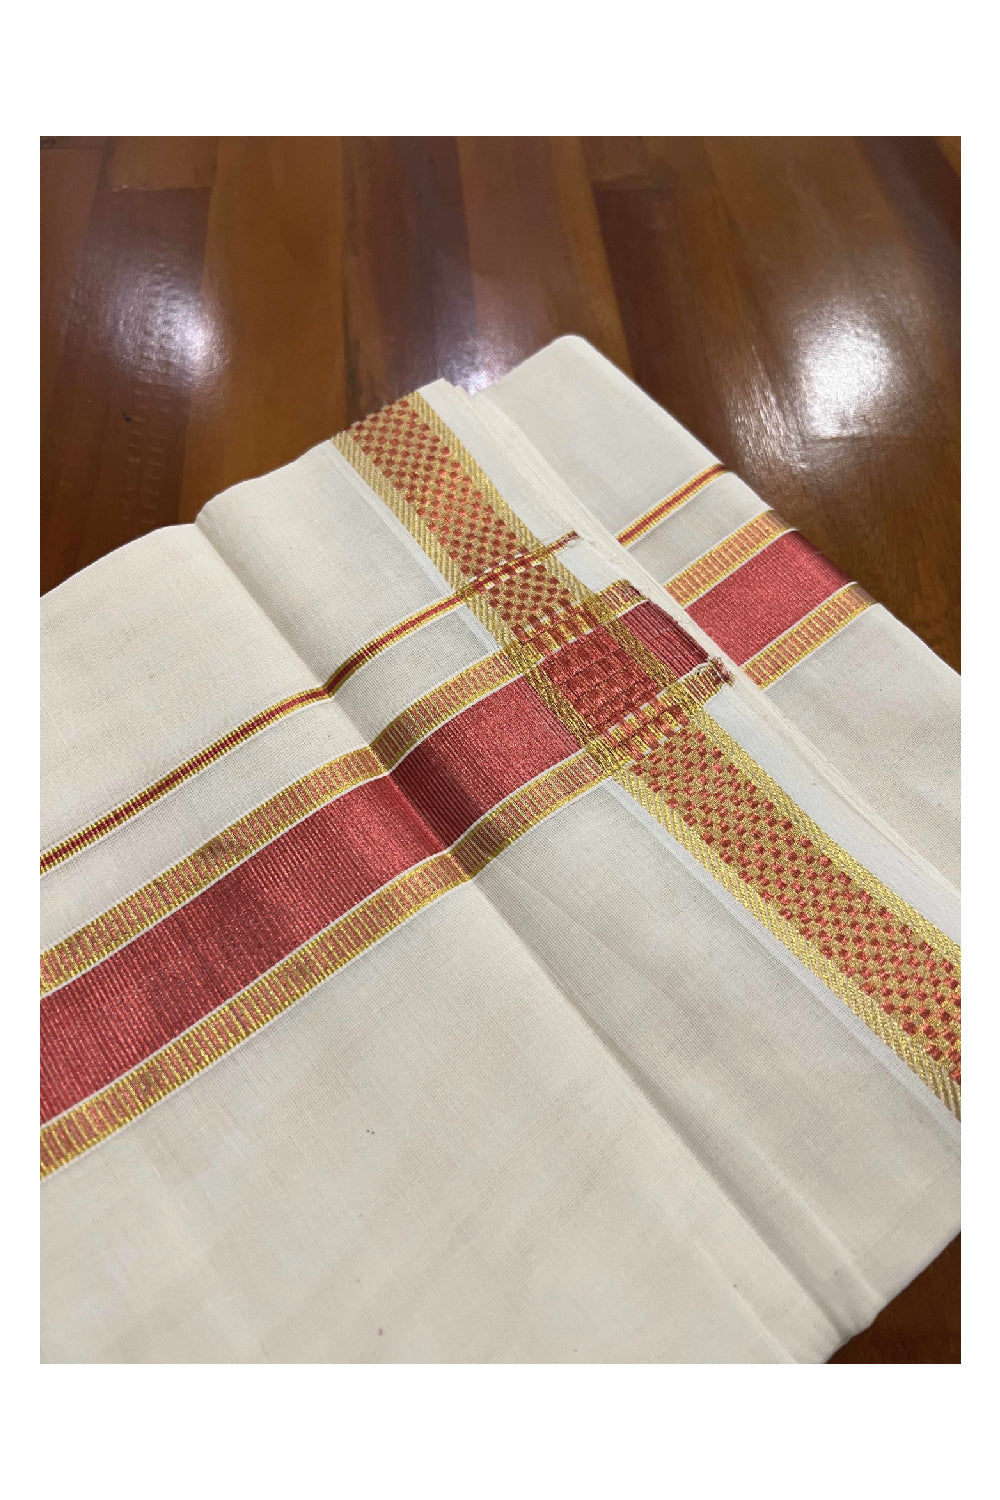 Southloom Kuthampully Handloom Pure Cotton Mundu with Golden and Copper Red Kasavu Border (South Indian Dhoti)